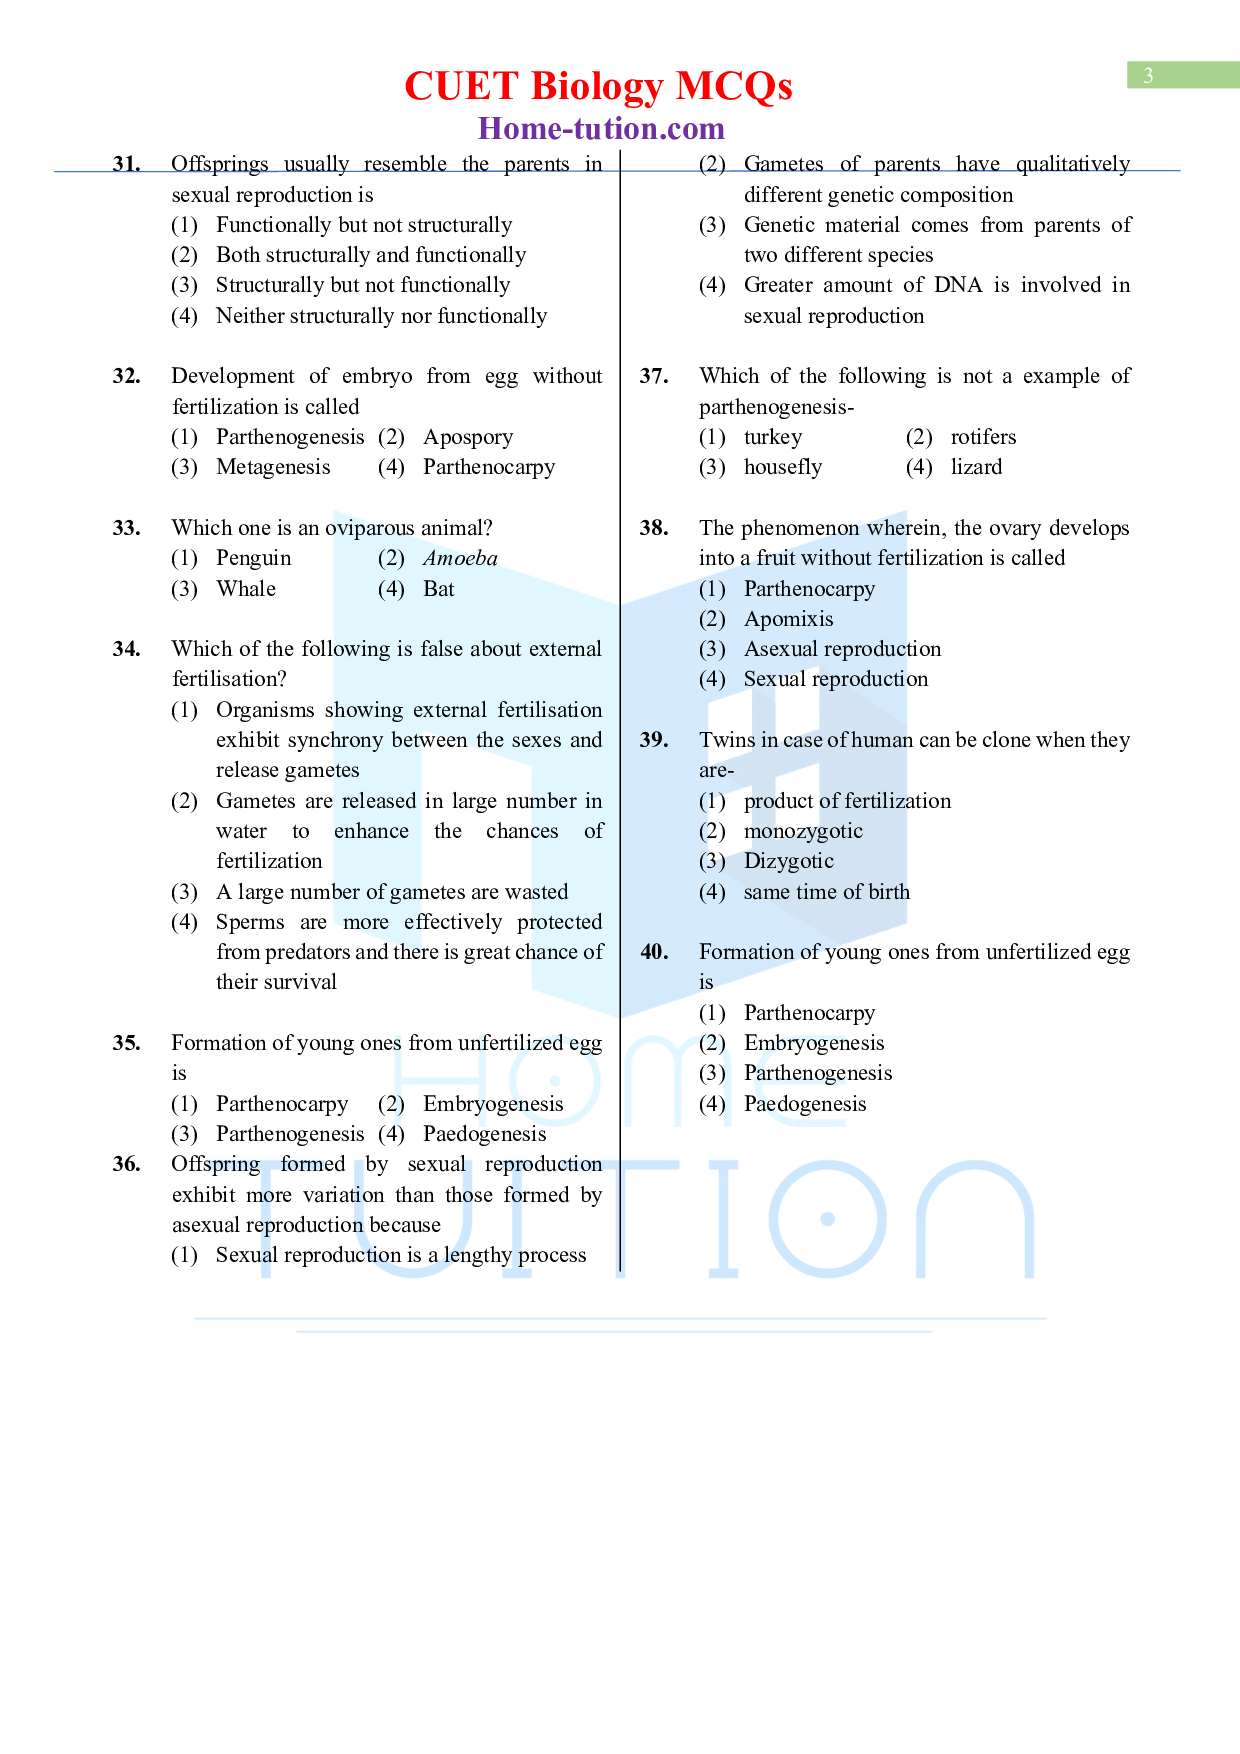 Biology MCQ Questions for CUET Chapter 1 Reproduction in Organisms